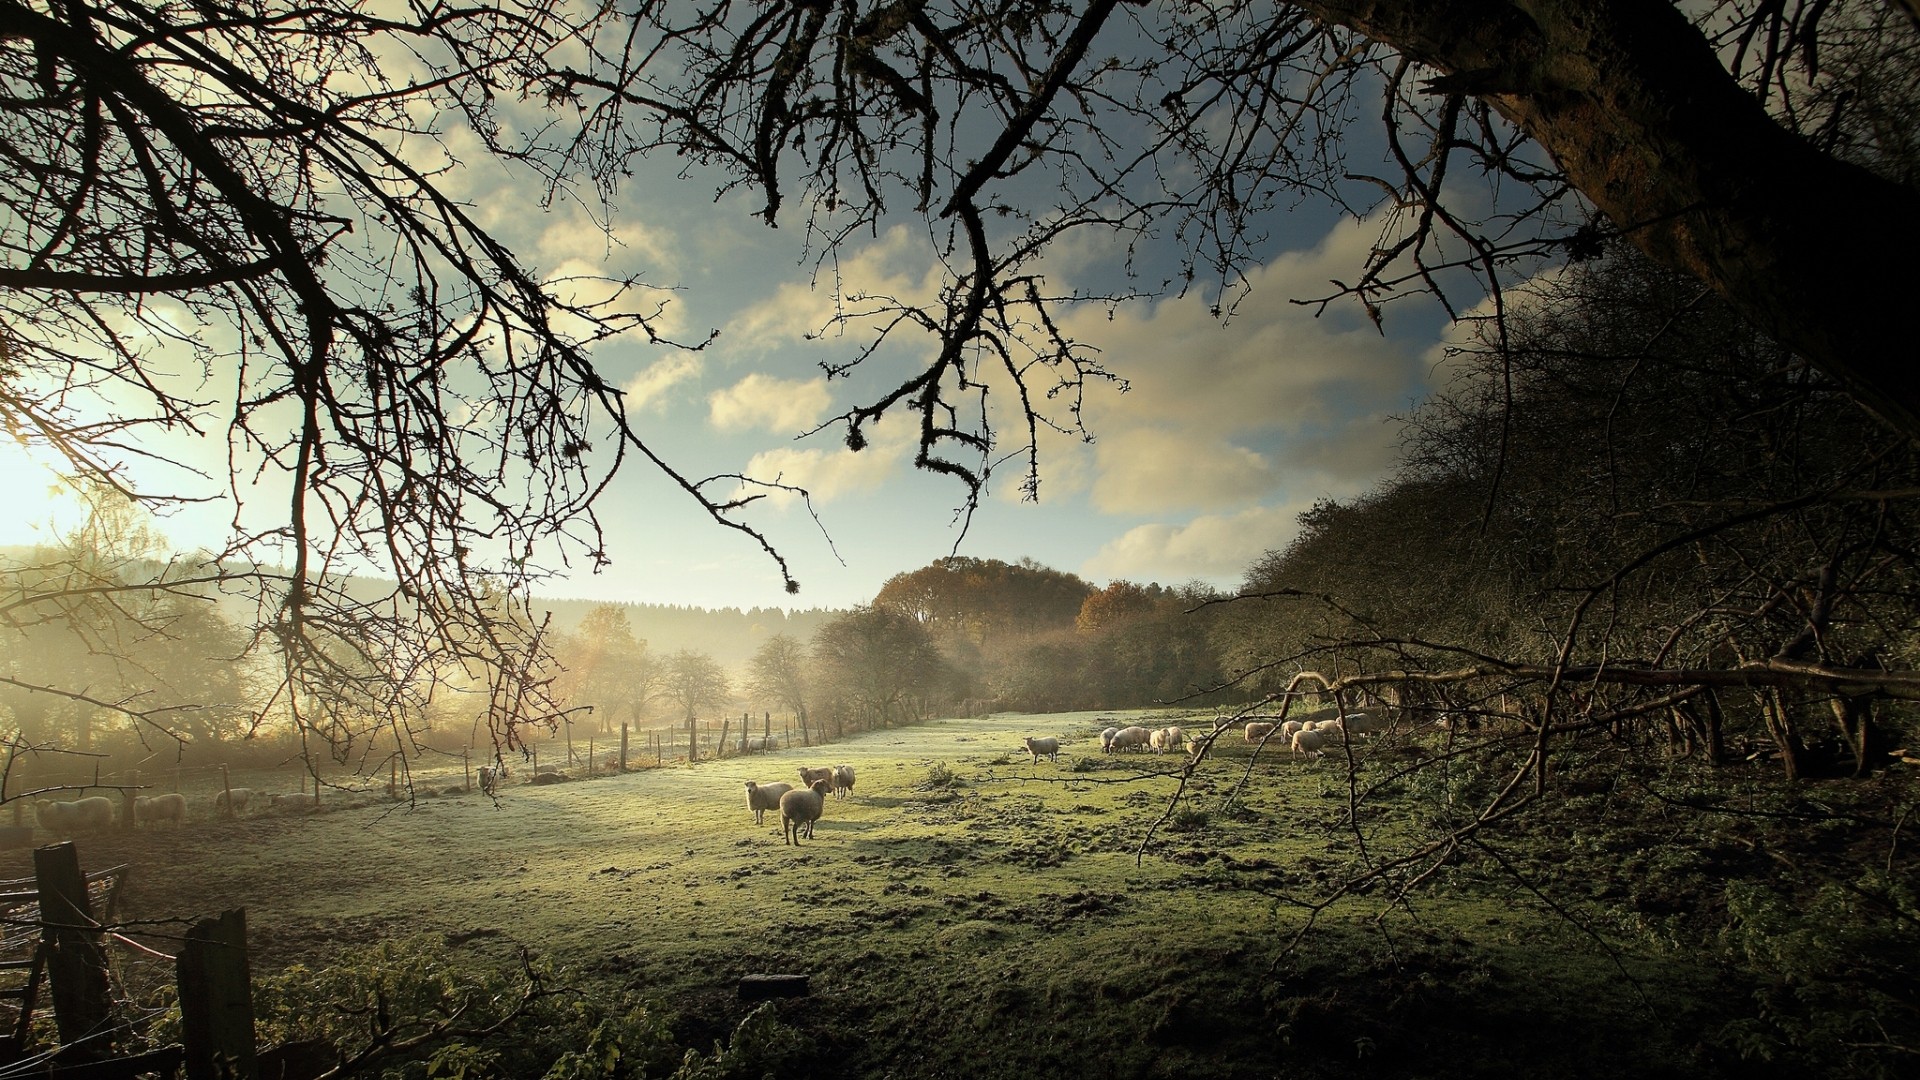 General 1920x1080 nature animals landscape trees sheep field grass forest mist clouds fence branch